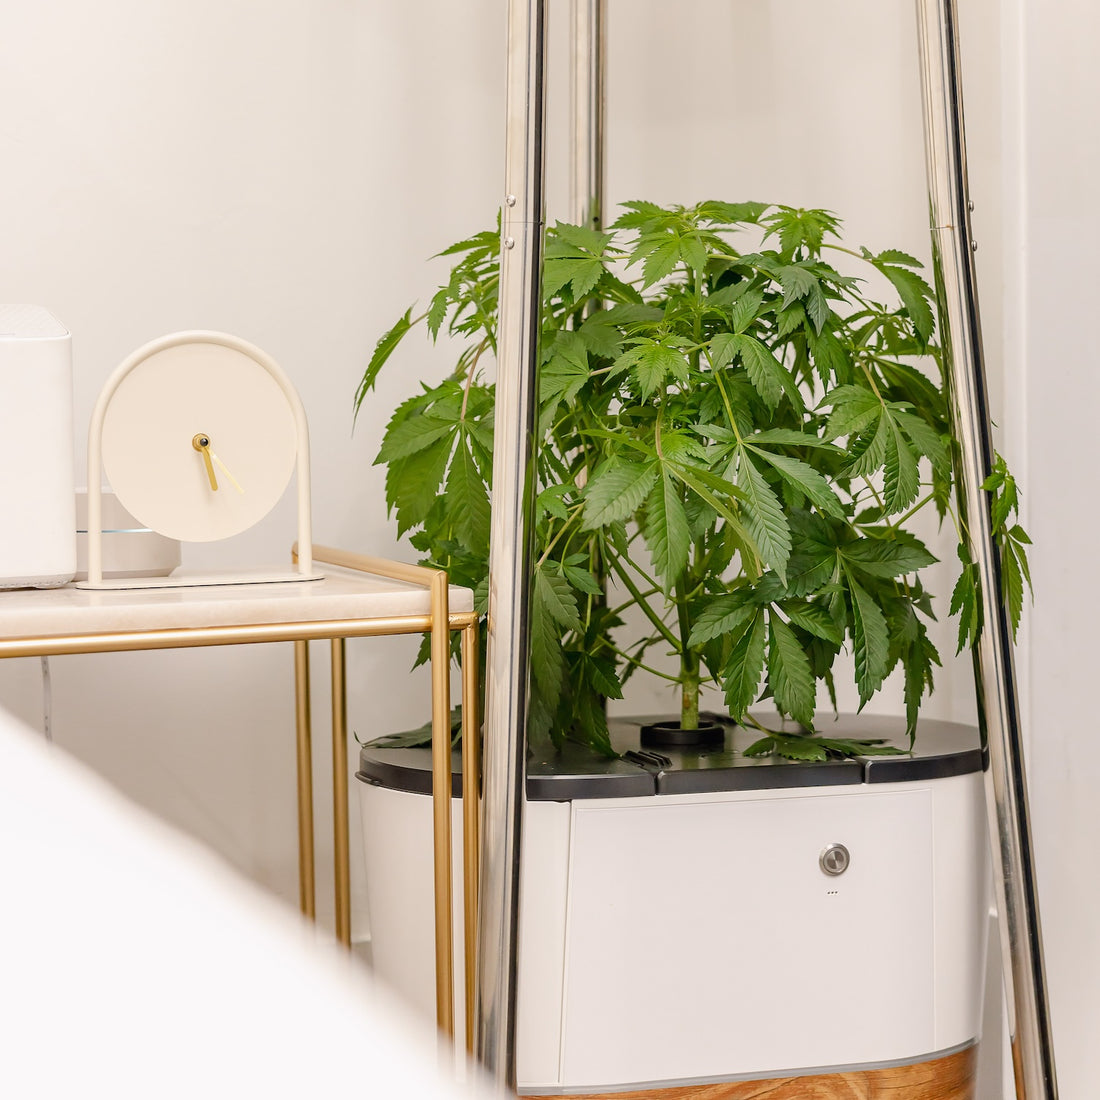 Growing Together: How Rentals are Revolutionizing Home Growing